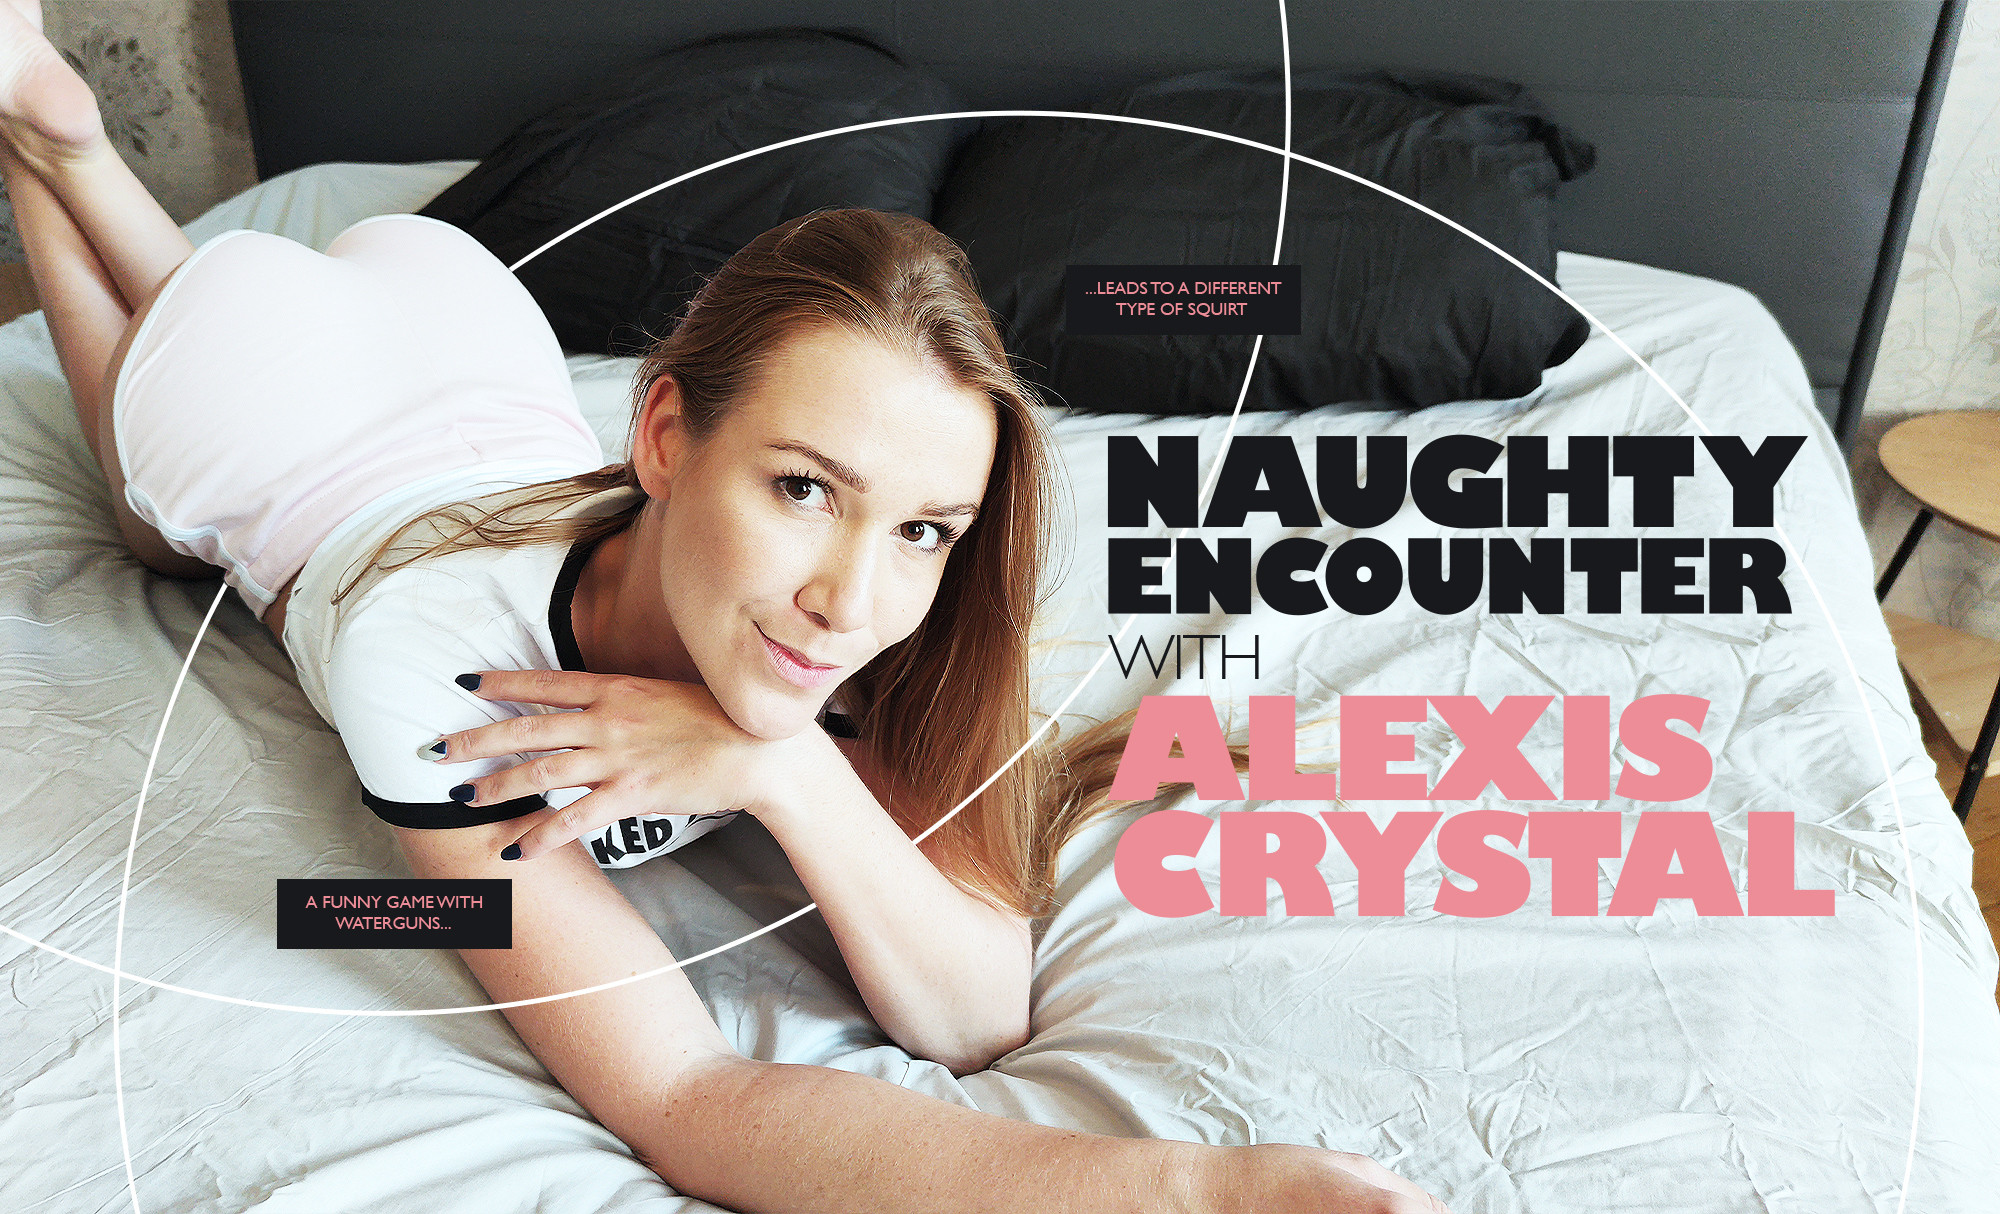 Life Selector Alexis Crystal Naughty Encounter with Alexis Crystal